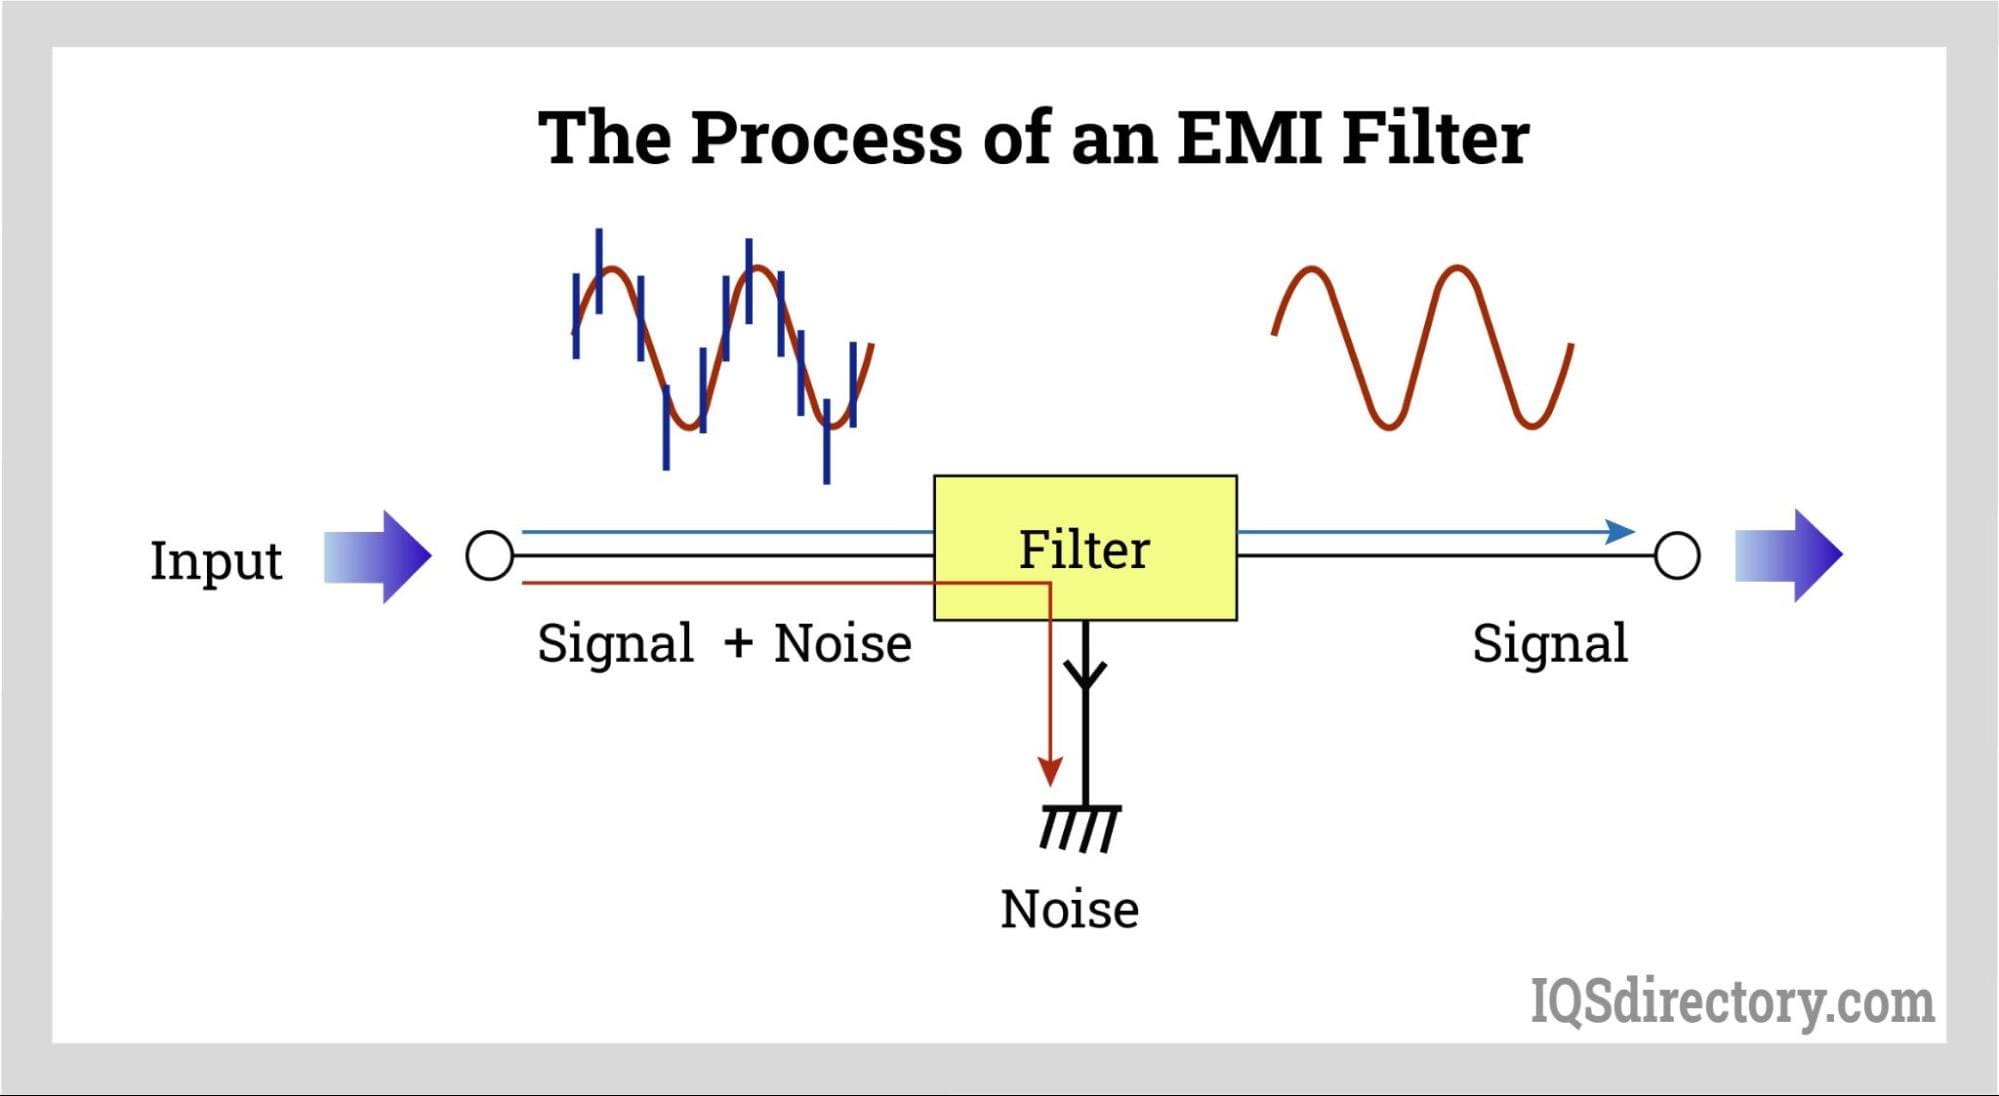 The Process of an EMI Filter